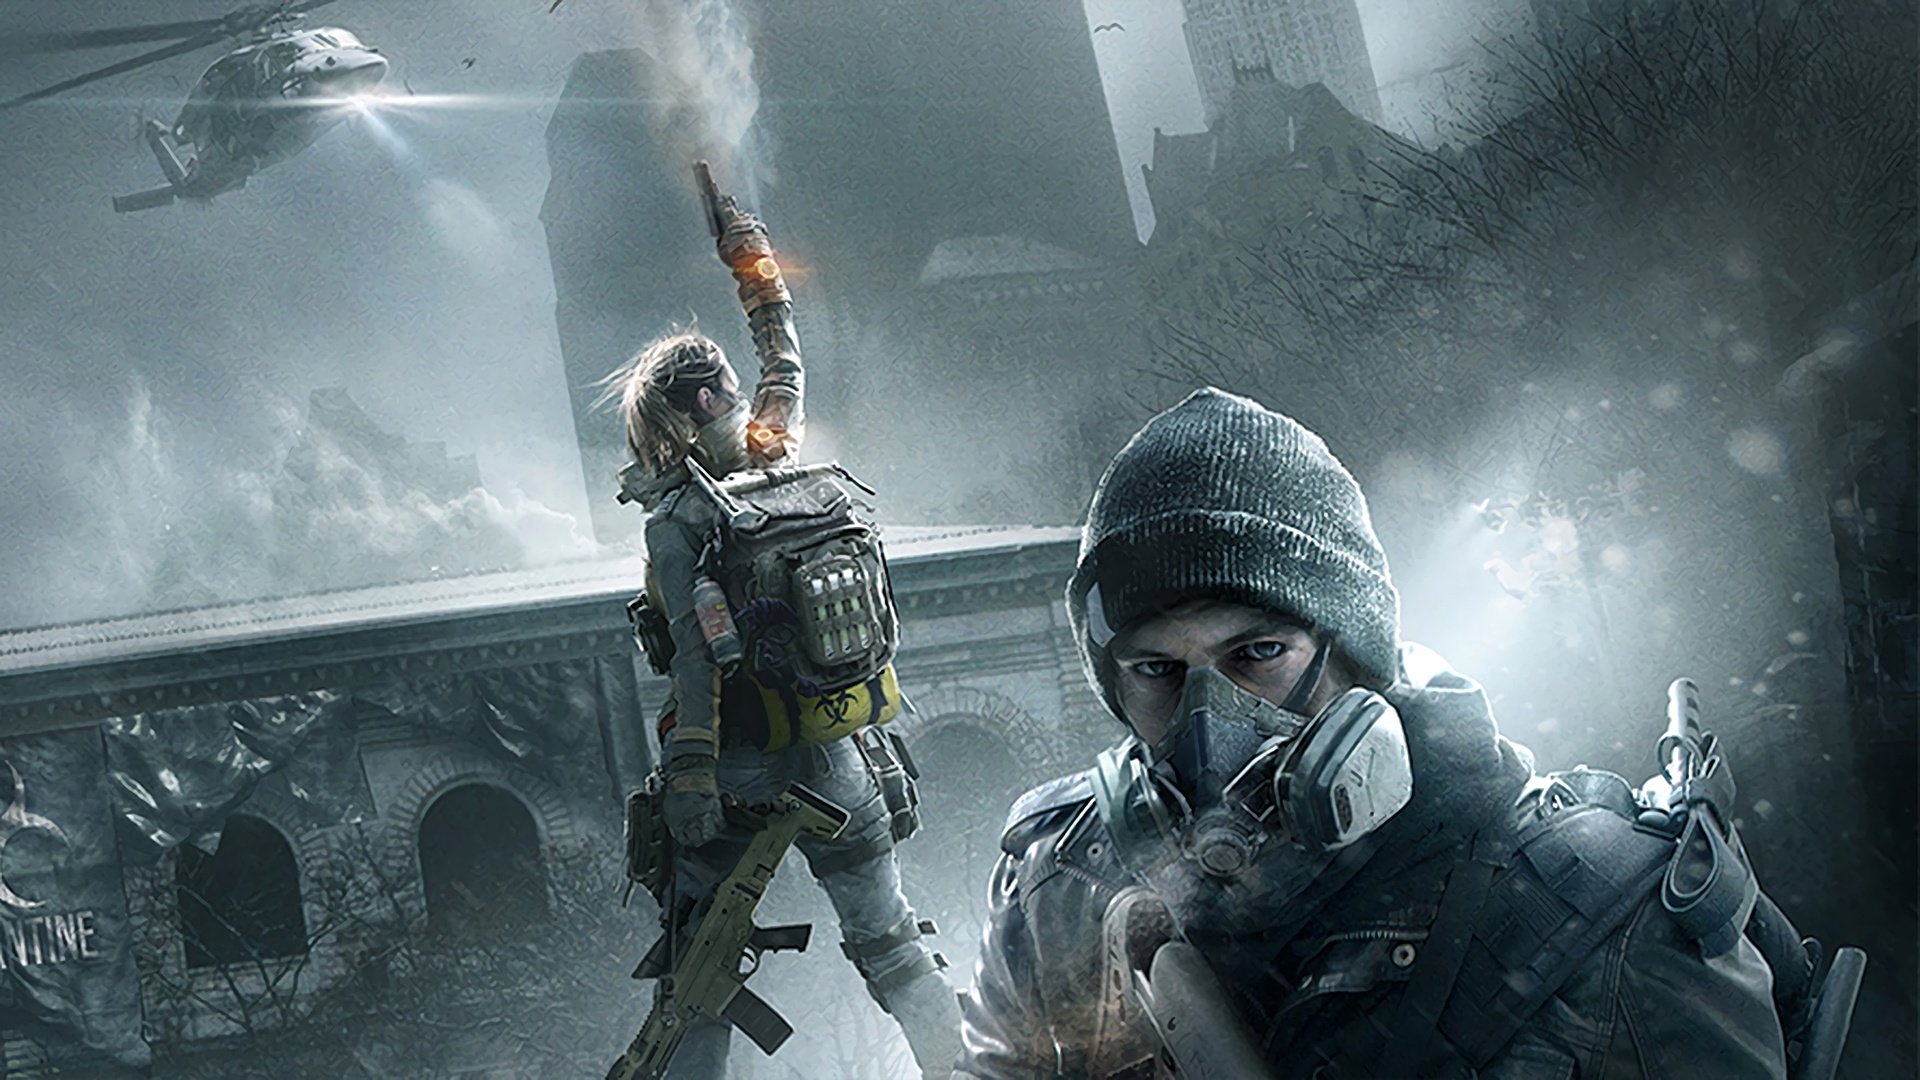 Awesome Tom Clancy's The Division free wallpaper ID:450028 for hd 1920x1080 desktop